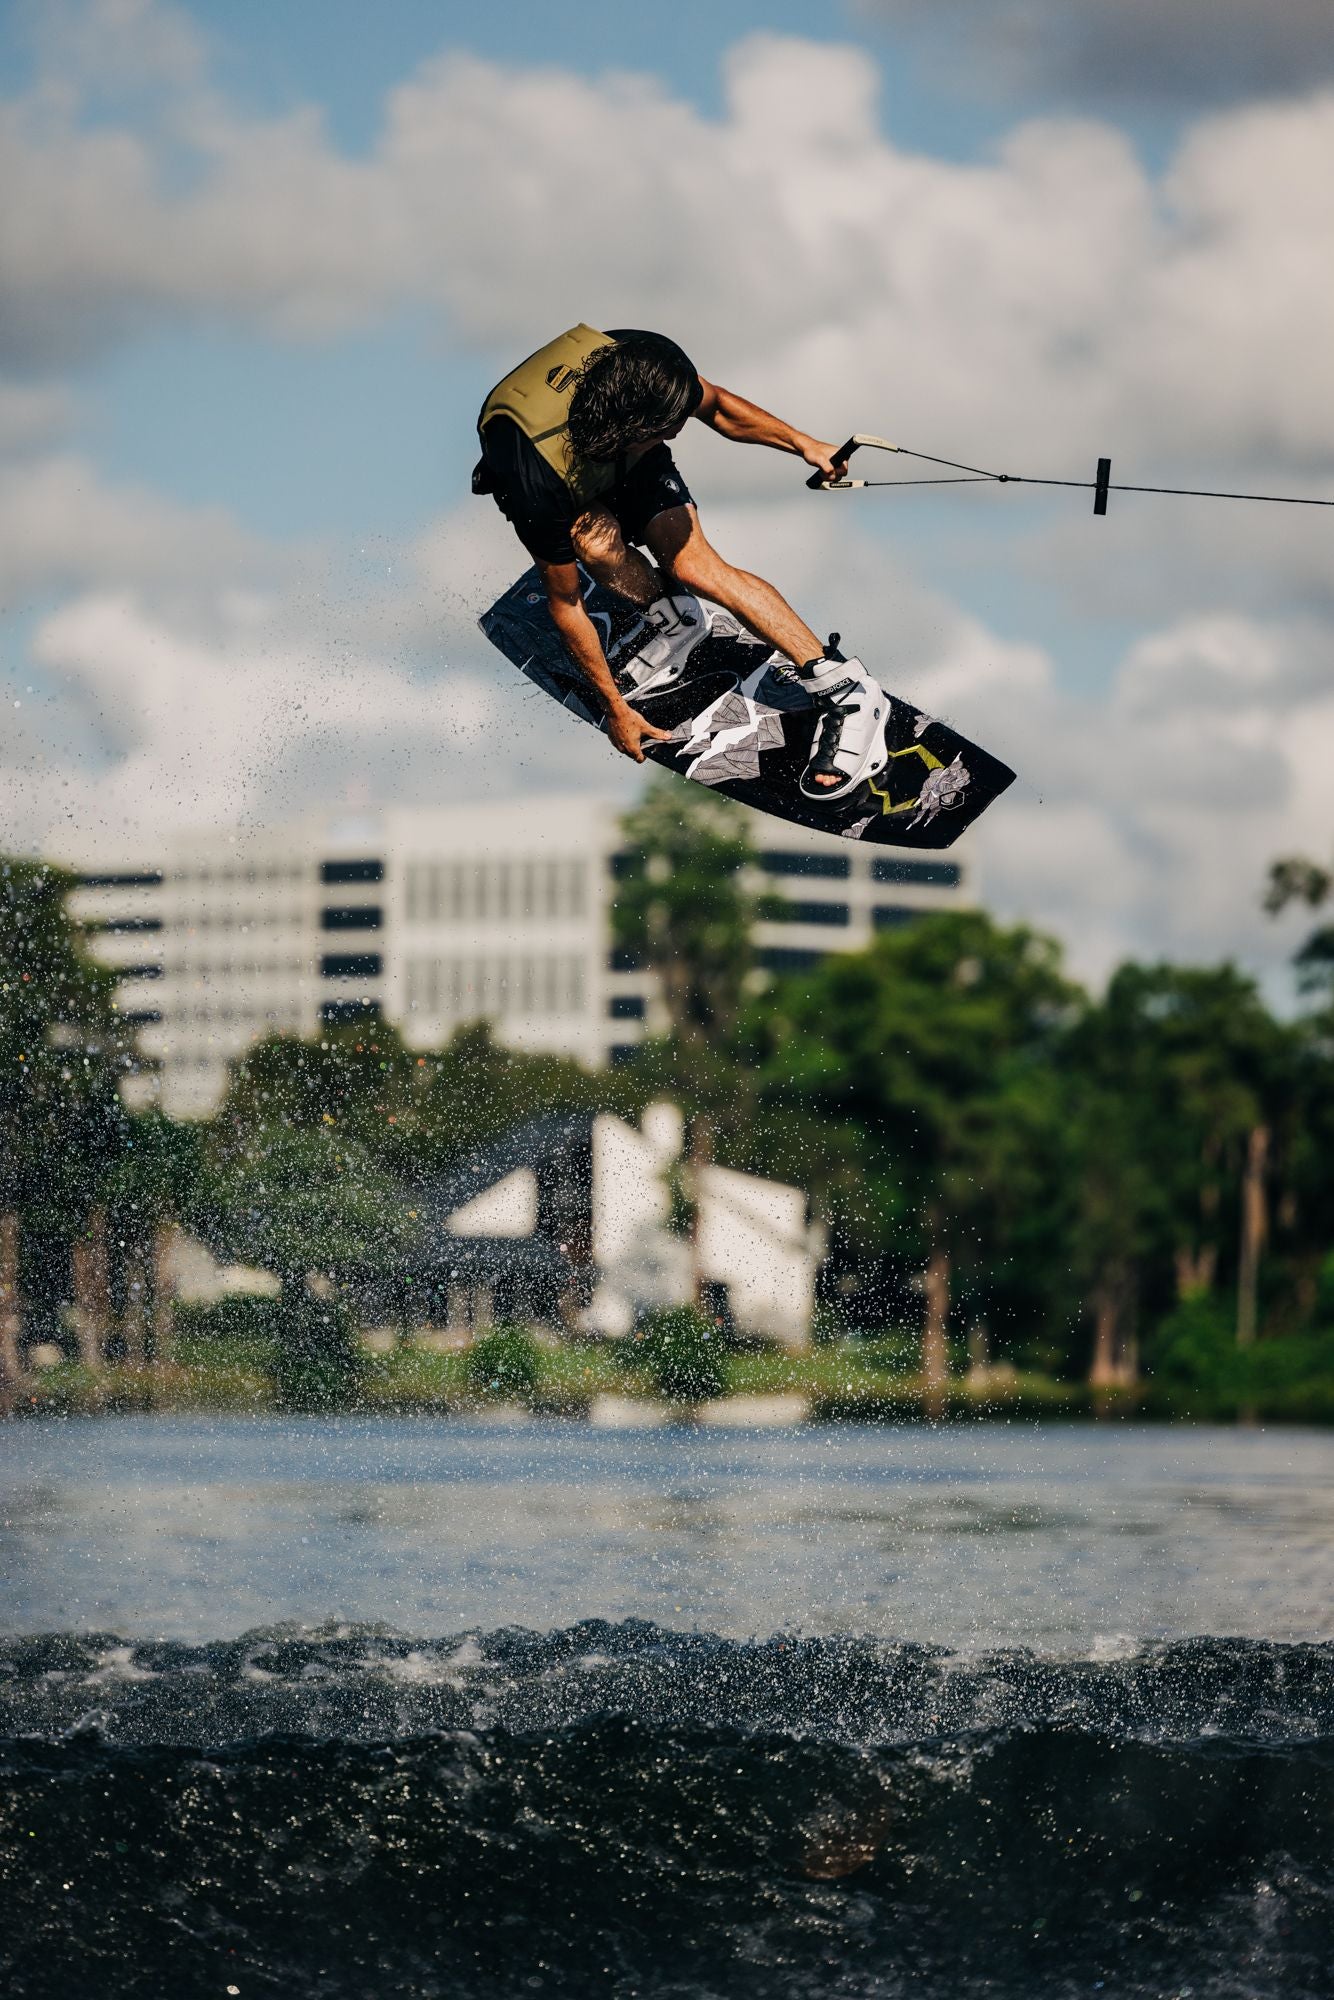 A person performing Liquid Force wakeboarding tricks in the air over a lake, showcasing explosive pop off the top and aggressive edge control.